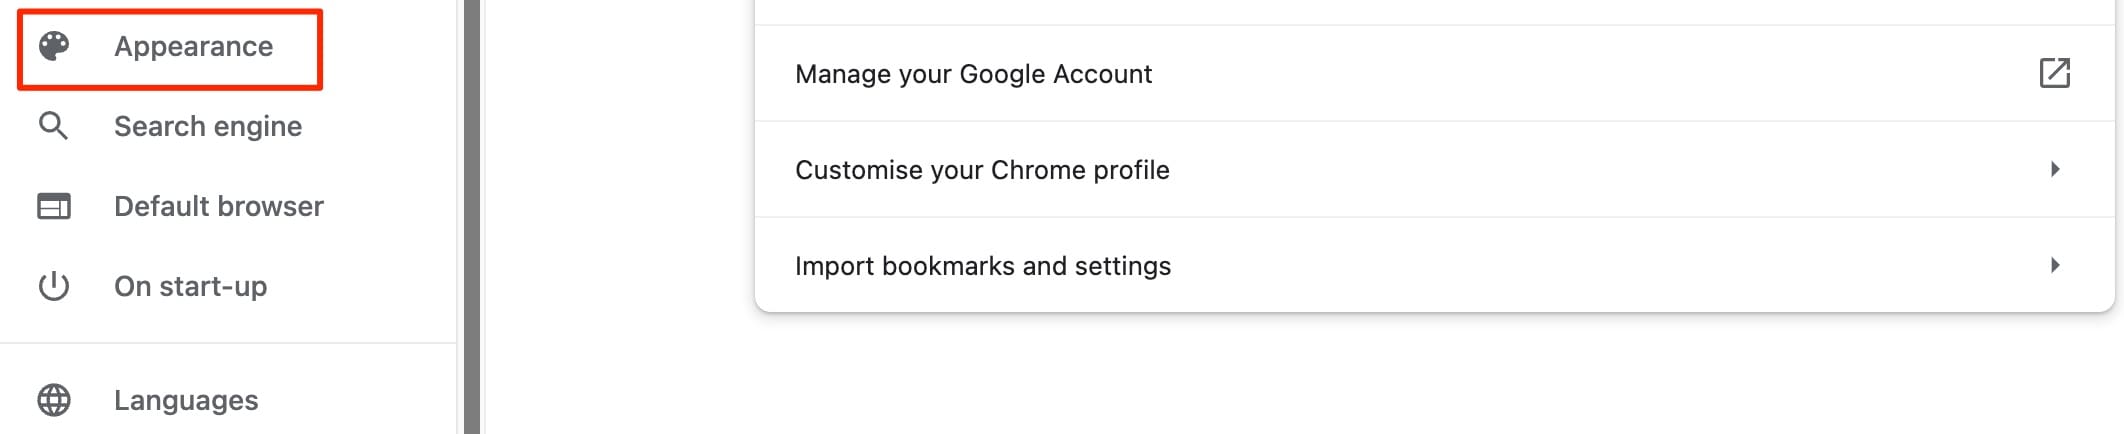 The appearance tab in Google Chrome